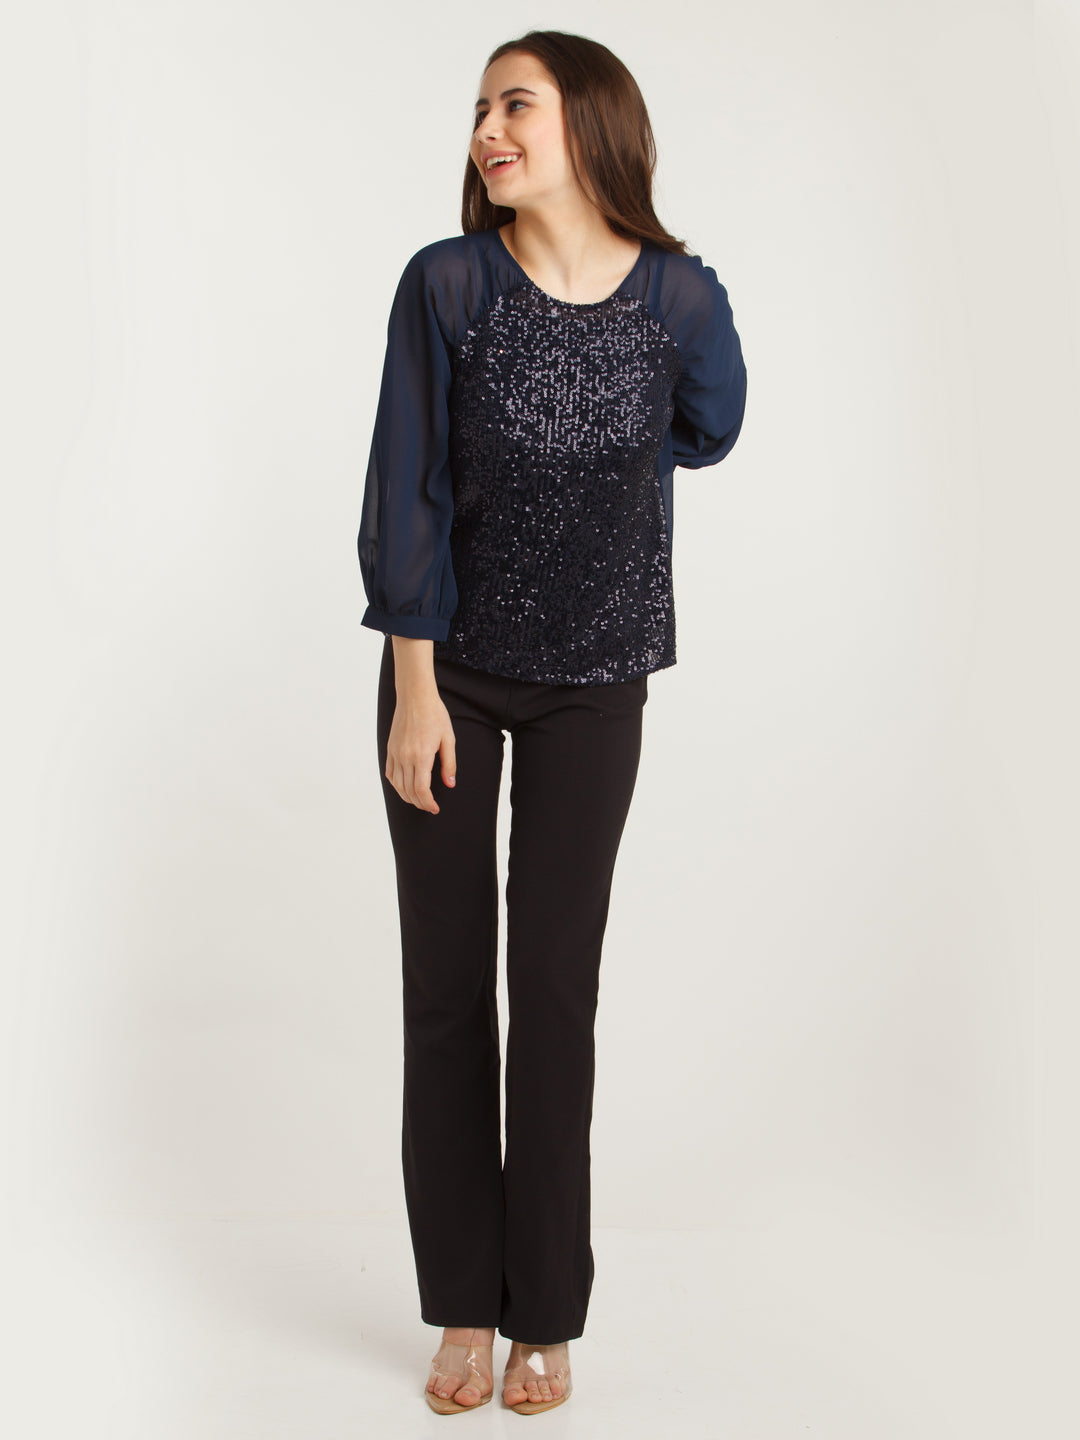 Navy Blue Embellished Straight Top For Women